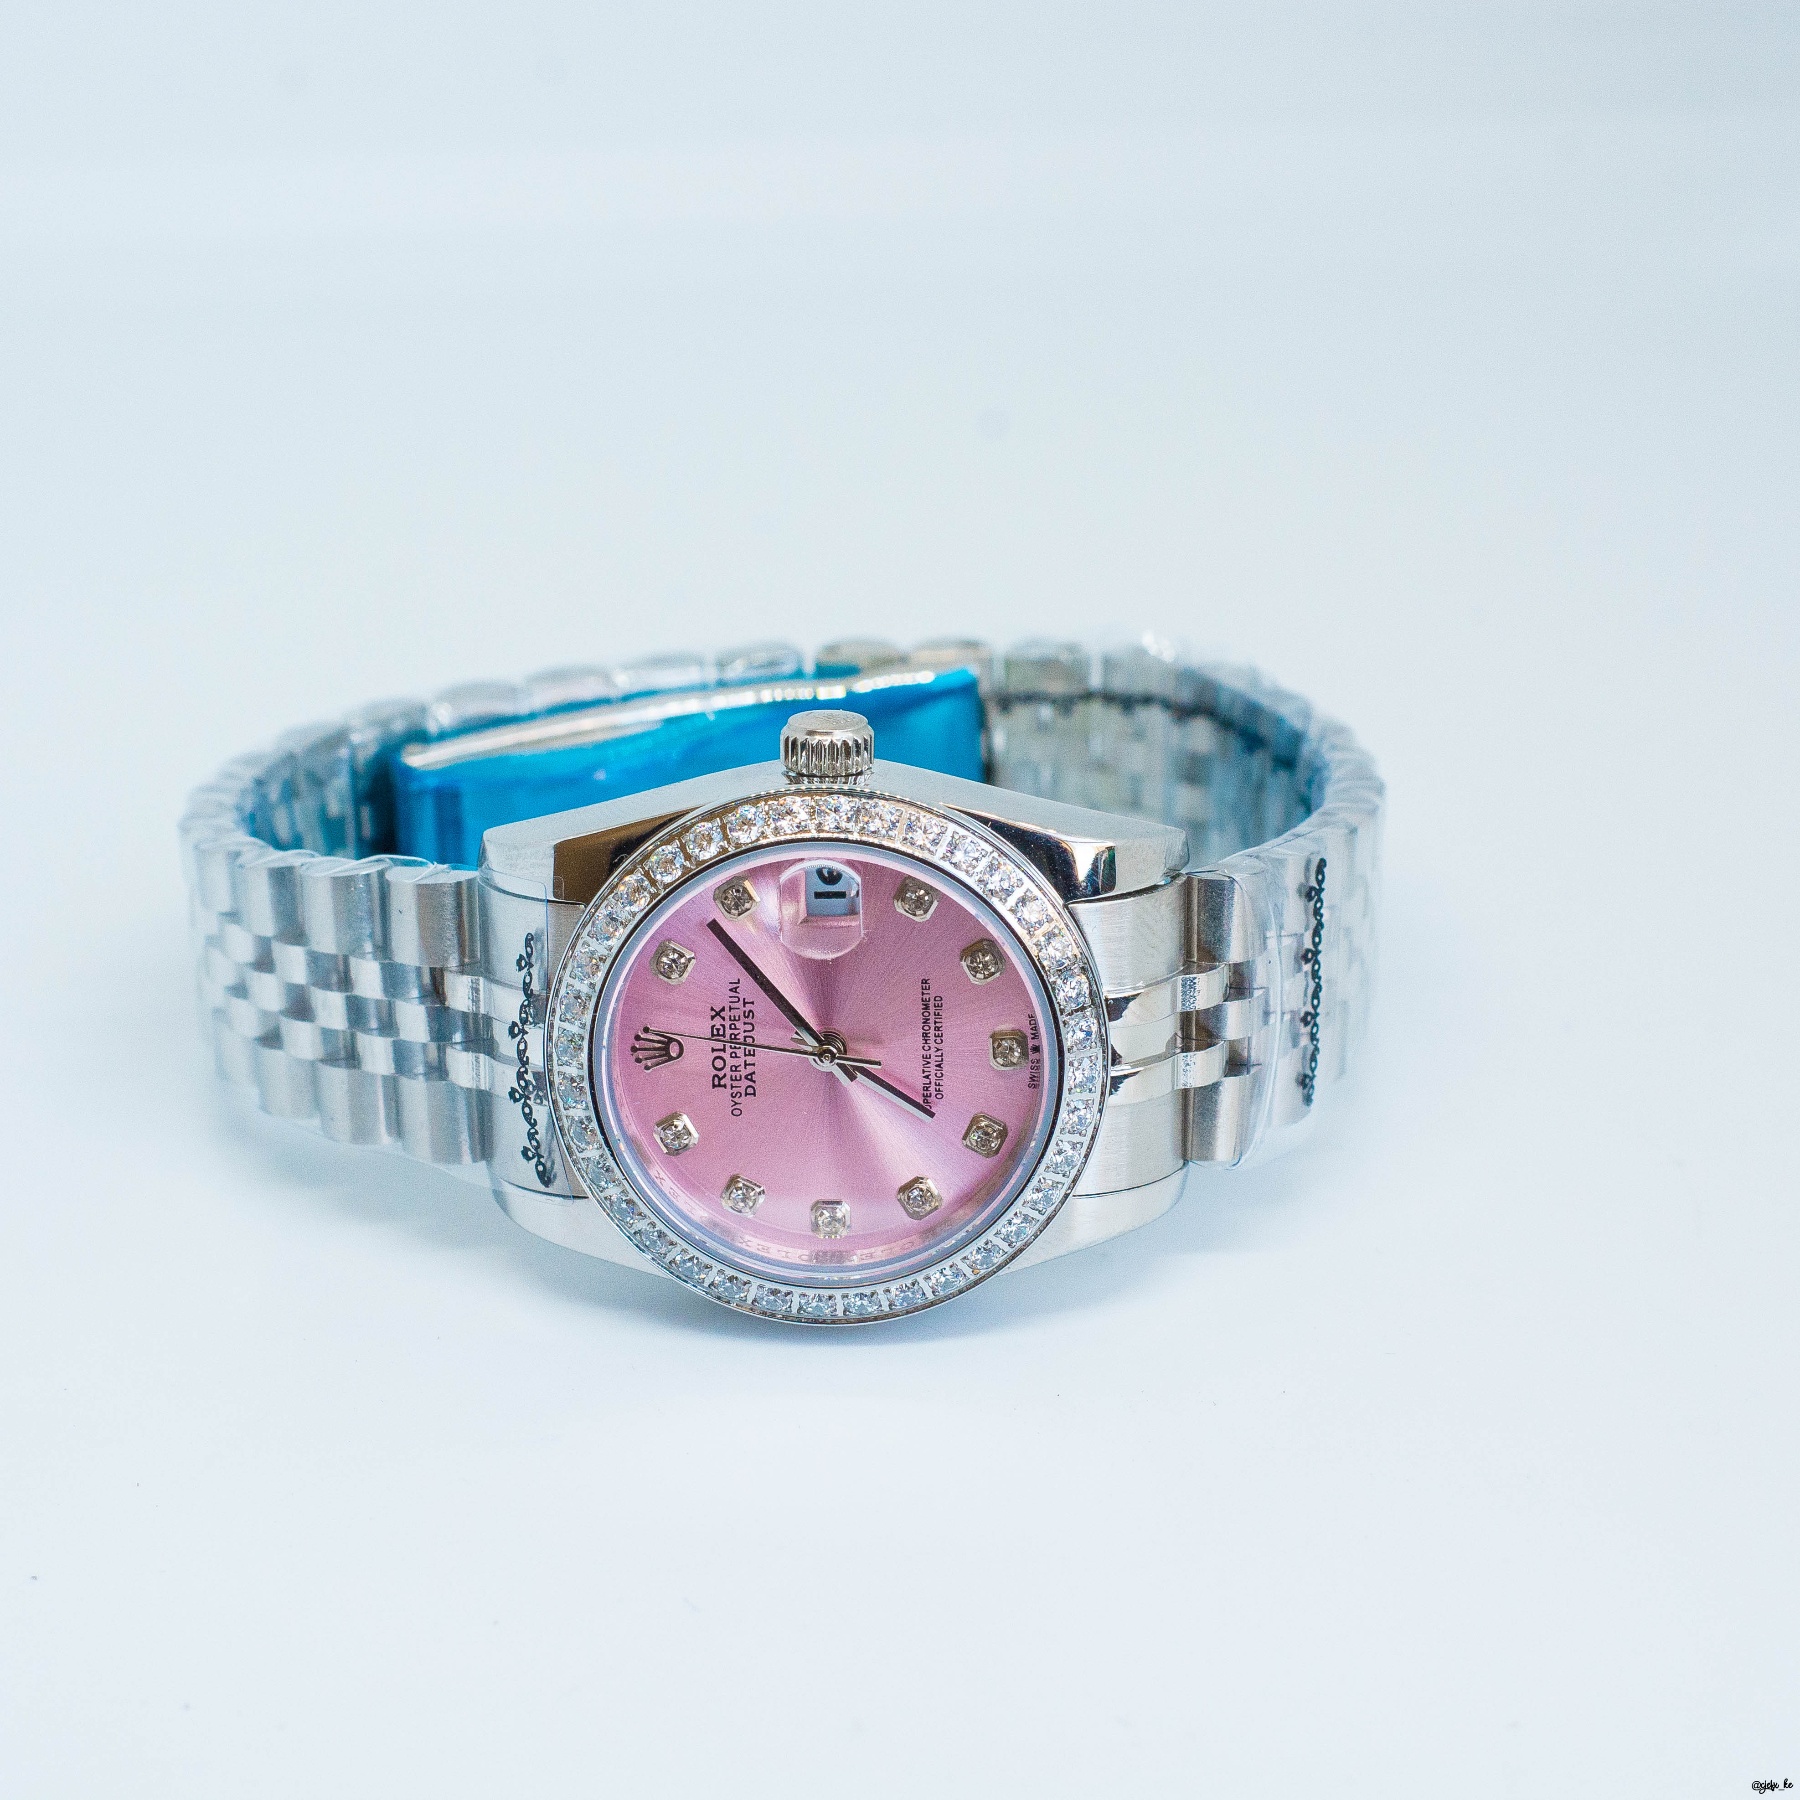 Rolex Lady Date just 28 mm Stainless Steel Pink Dial for sale in Nairobi, Kenya.